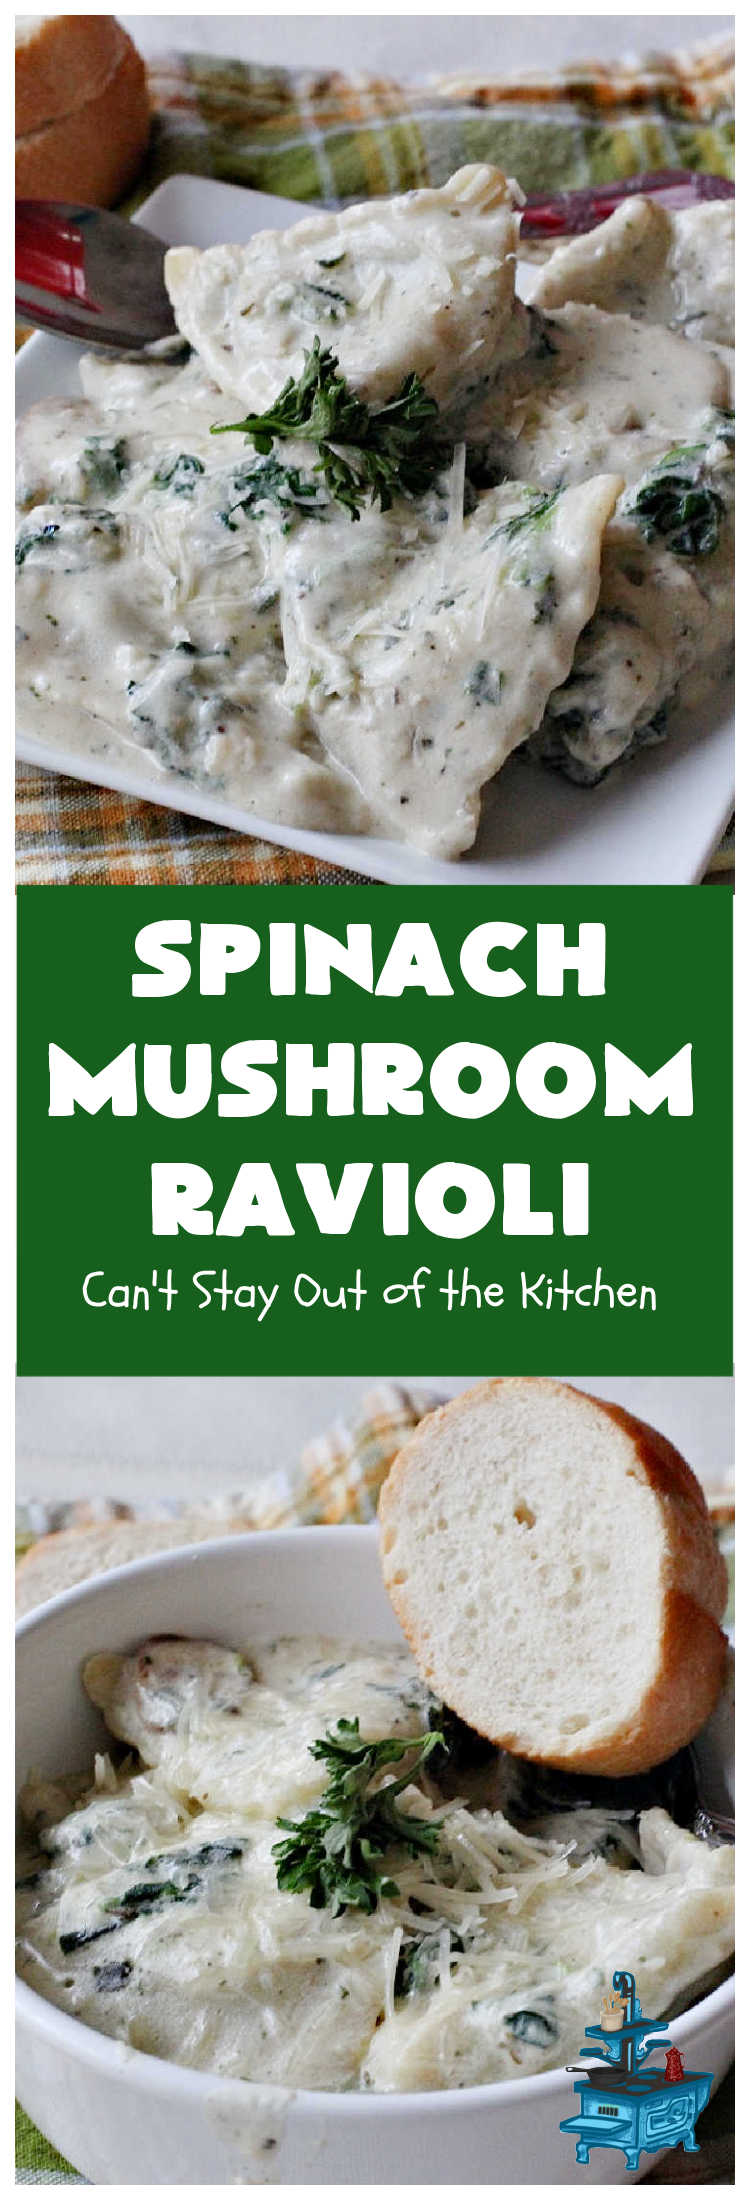 Spinach Mushroom Ravioli | Can't Stay Out of the Kitchen | This #MeatlessMonday #recipe can be dinner ready in less than 30 minutes! It's totally mouthwatering & irresistible. This fabulous #pasta dish is filled with three #cheeses, #spinach and two kinds of #mushrooms in a #garlic #AlfredoSauce that's succulent and amazing. #ravioli #SpinachMushroomRavioliSpinach Mushroom Ravioli | Can't Stay Out of the Kitchen | This #MeatlessMonday #recipe can be dinner ready in less than 30 minutes! It's totally mouthwatering & irresistible. This fabulous #pasta dish is filled with three #cheeses, #spinach and two kinds of #mushrooms in a #garlic #AlfredoSauce that's succulent and amazing. #ravioli #SpinachMushroomRavioli